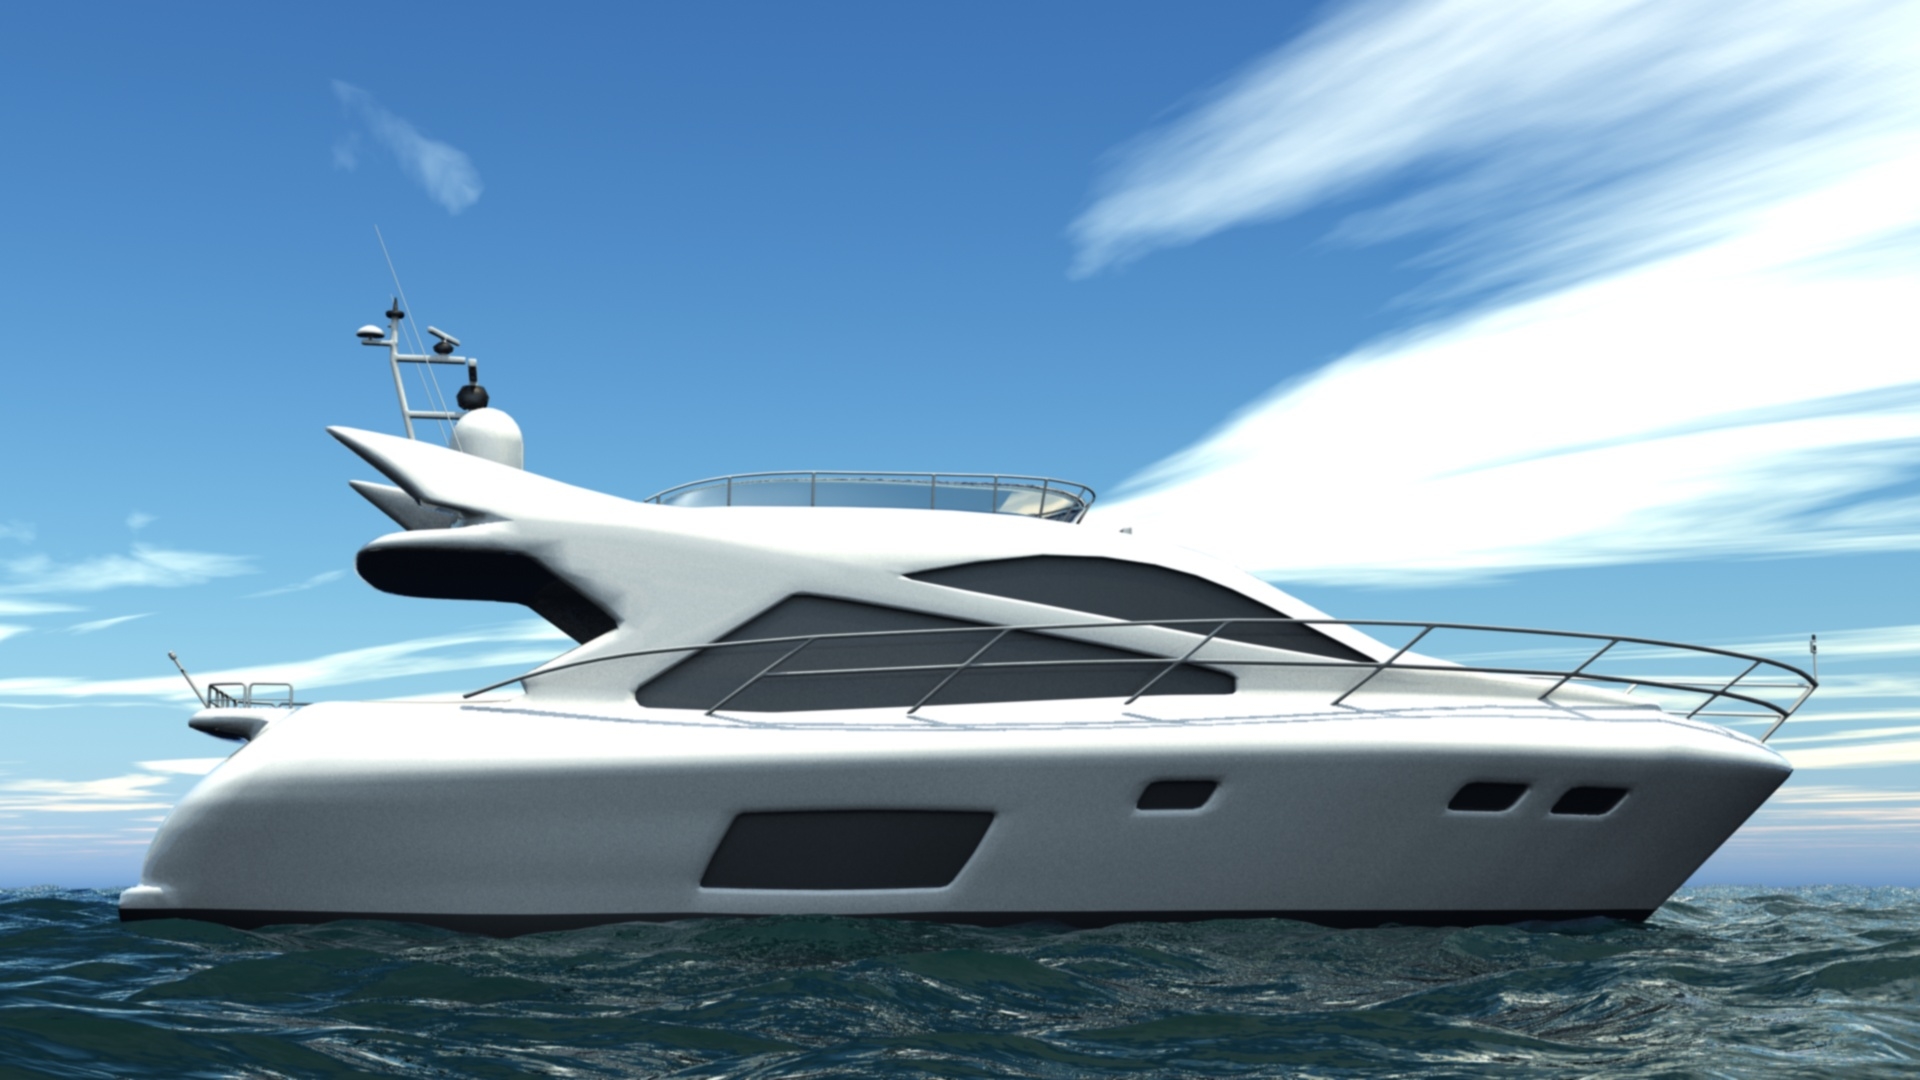 yacht 3d model free download